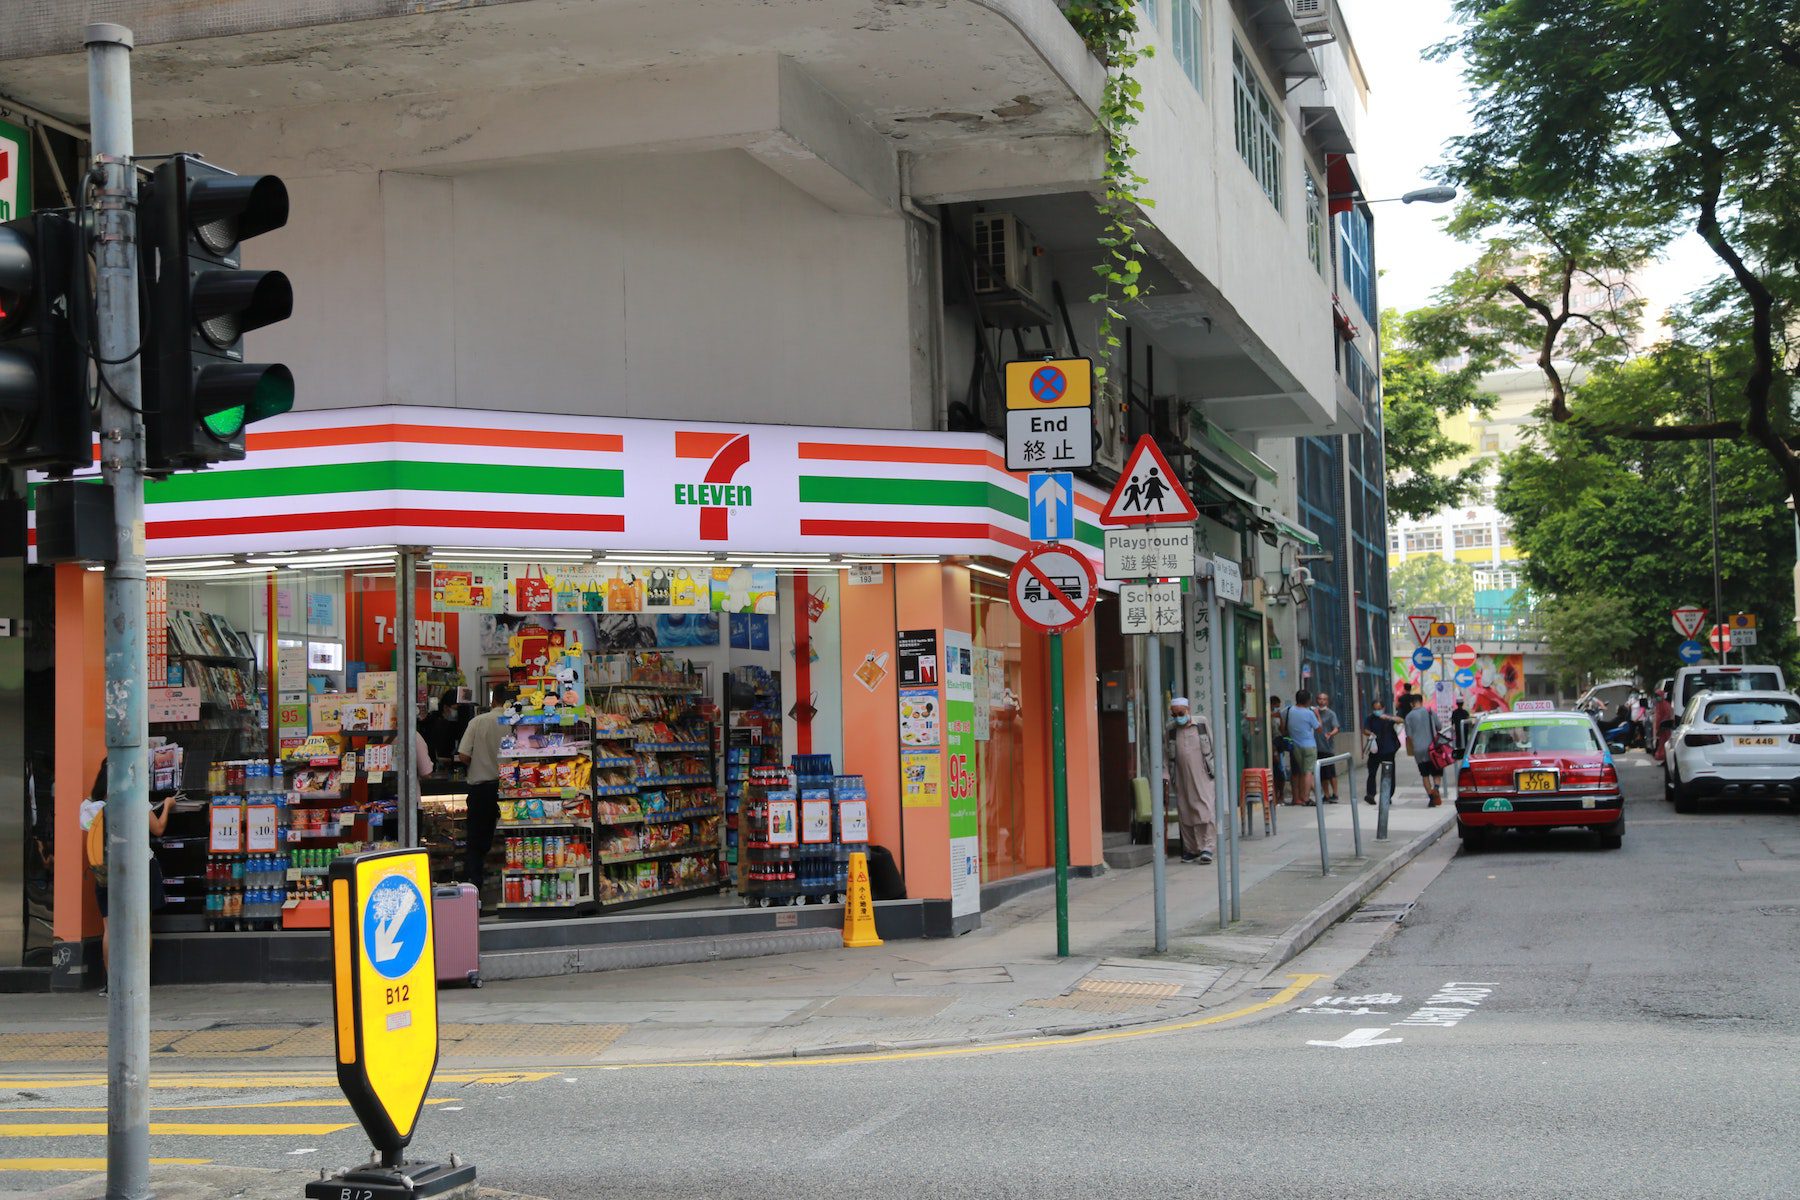 A 7 Eleven convenience store in an urban area from the street. 